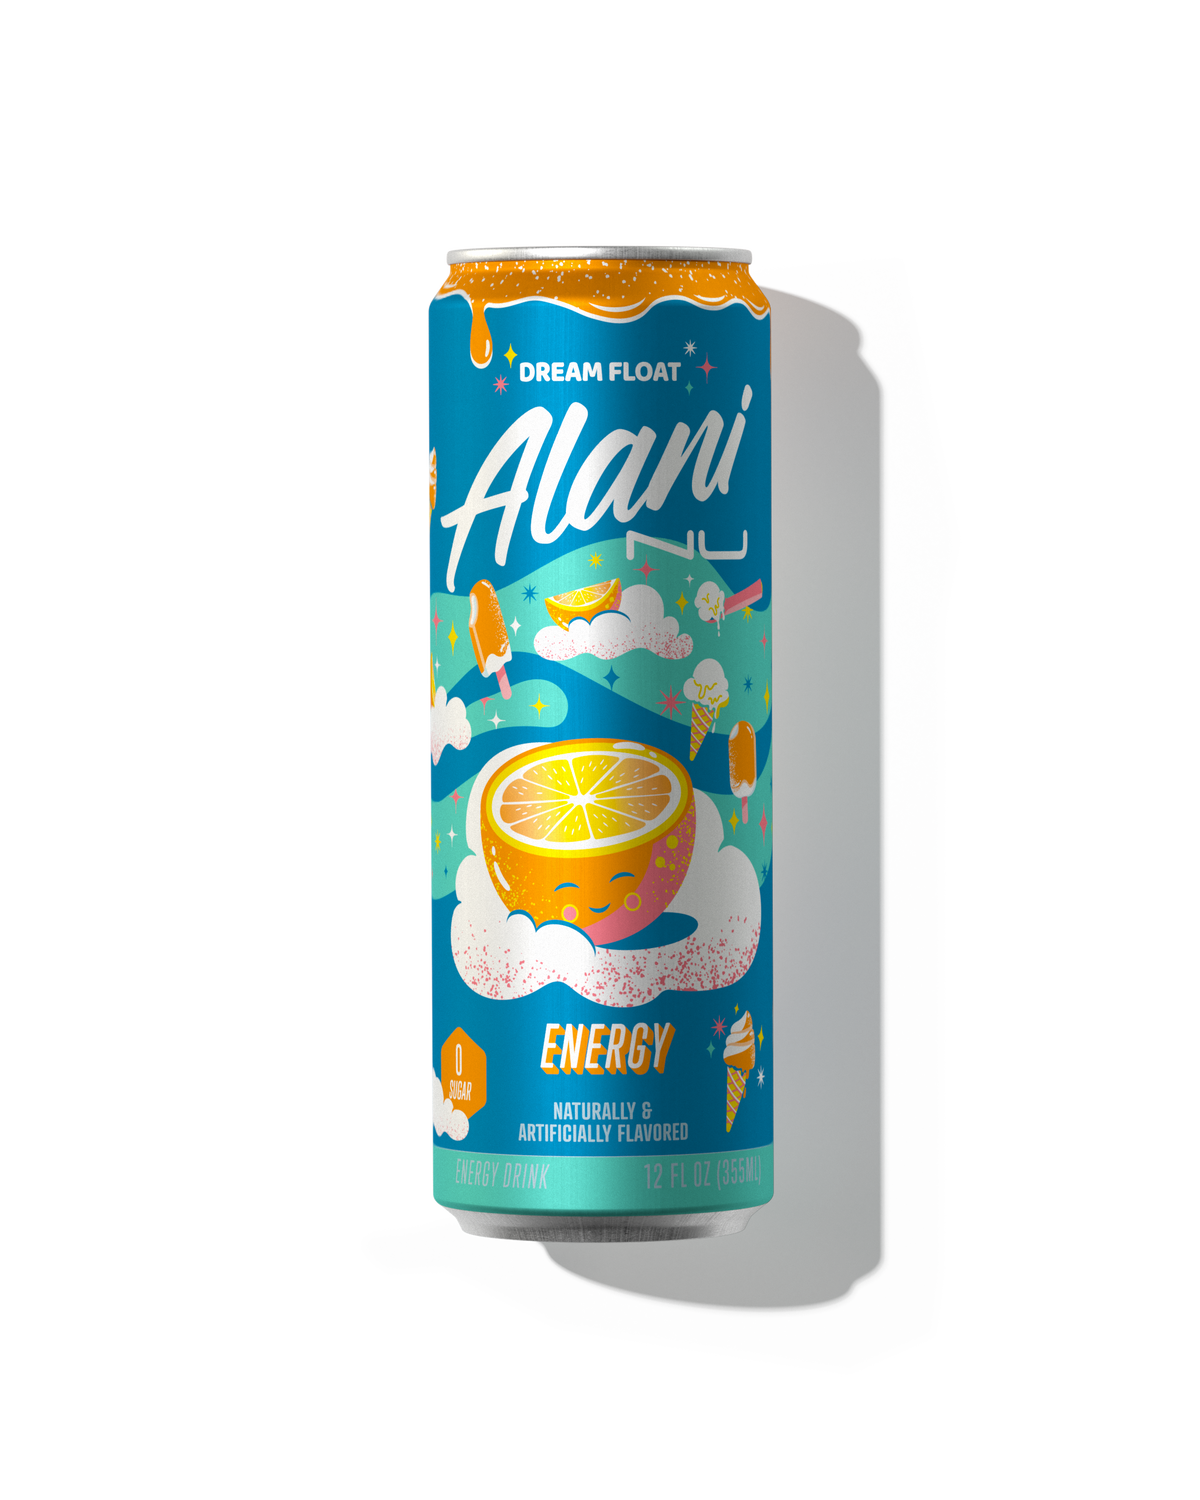 A 12 fl oz can energy drink in Dream Float flavor.